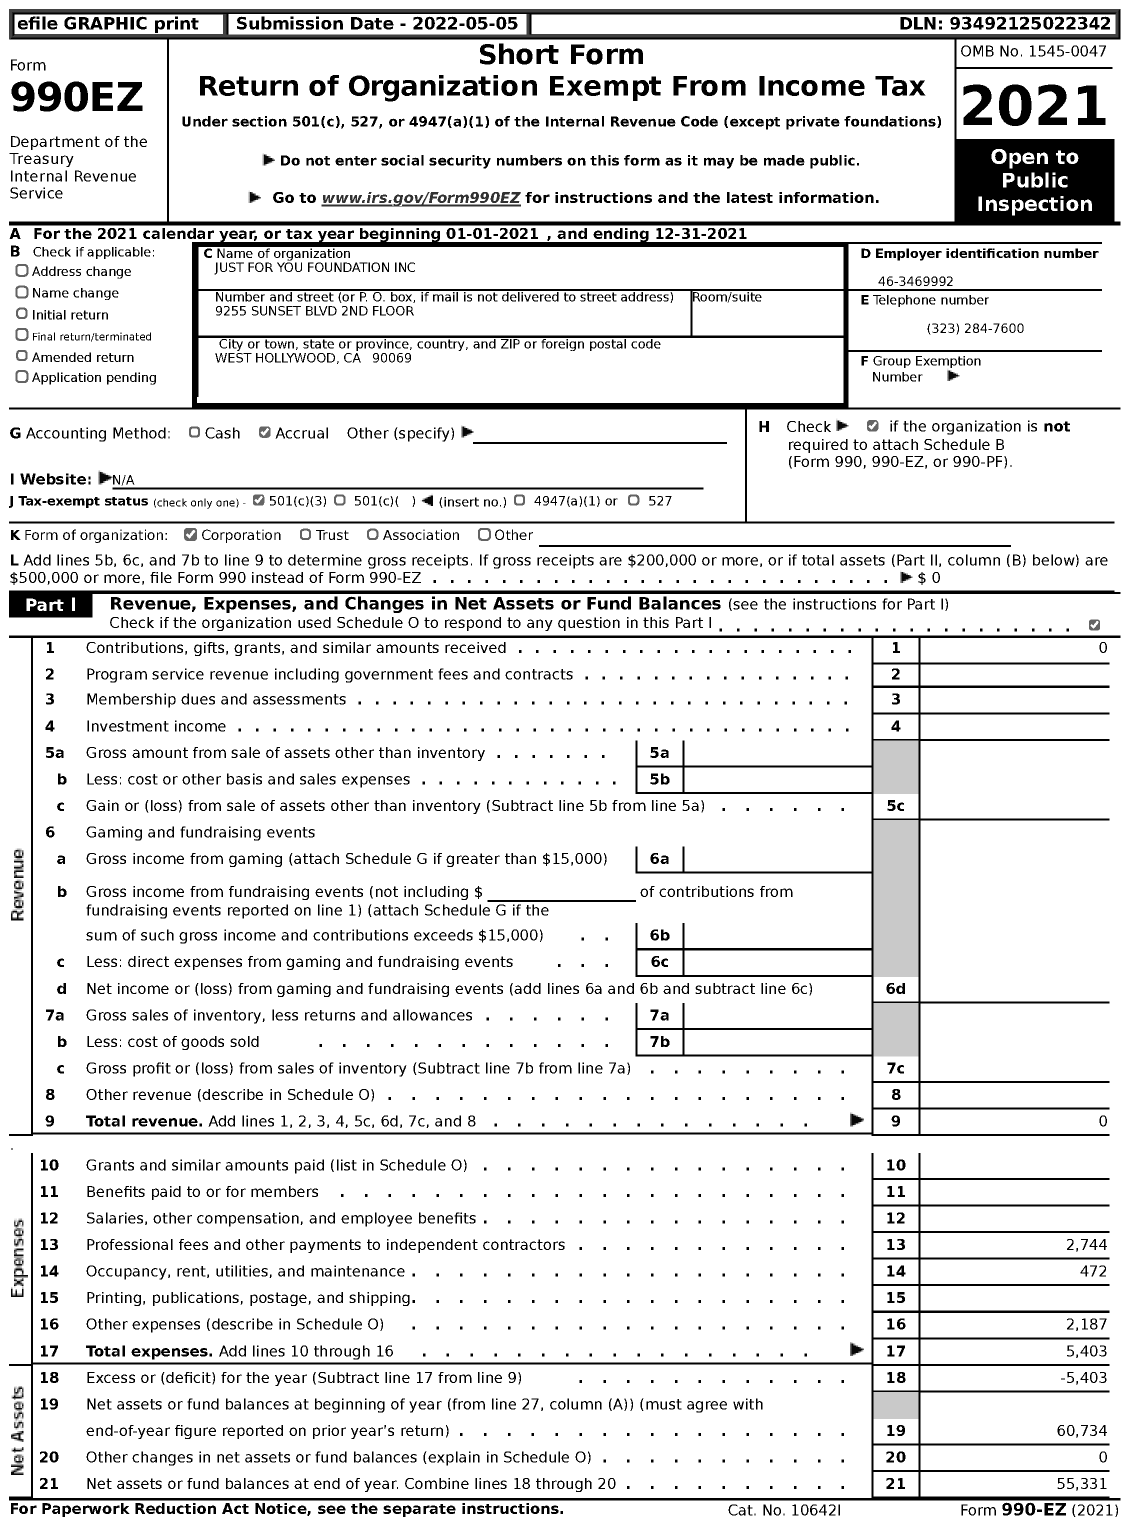 Image of first page of 2021 Form 990EZ for Just for You Foundation